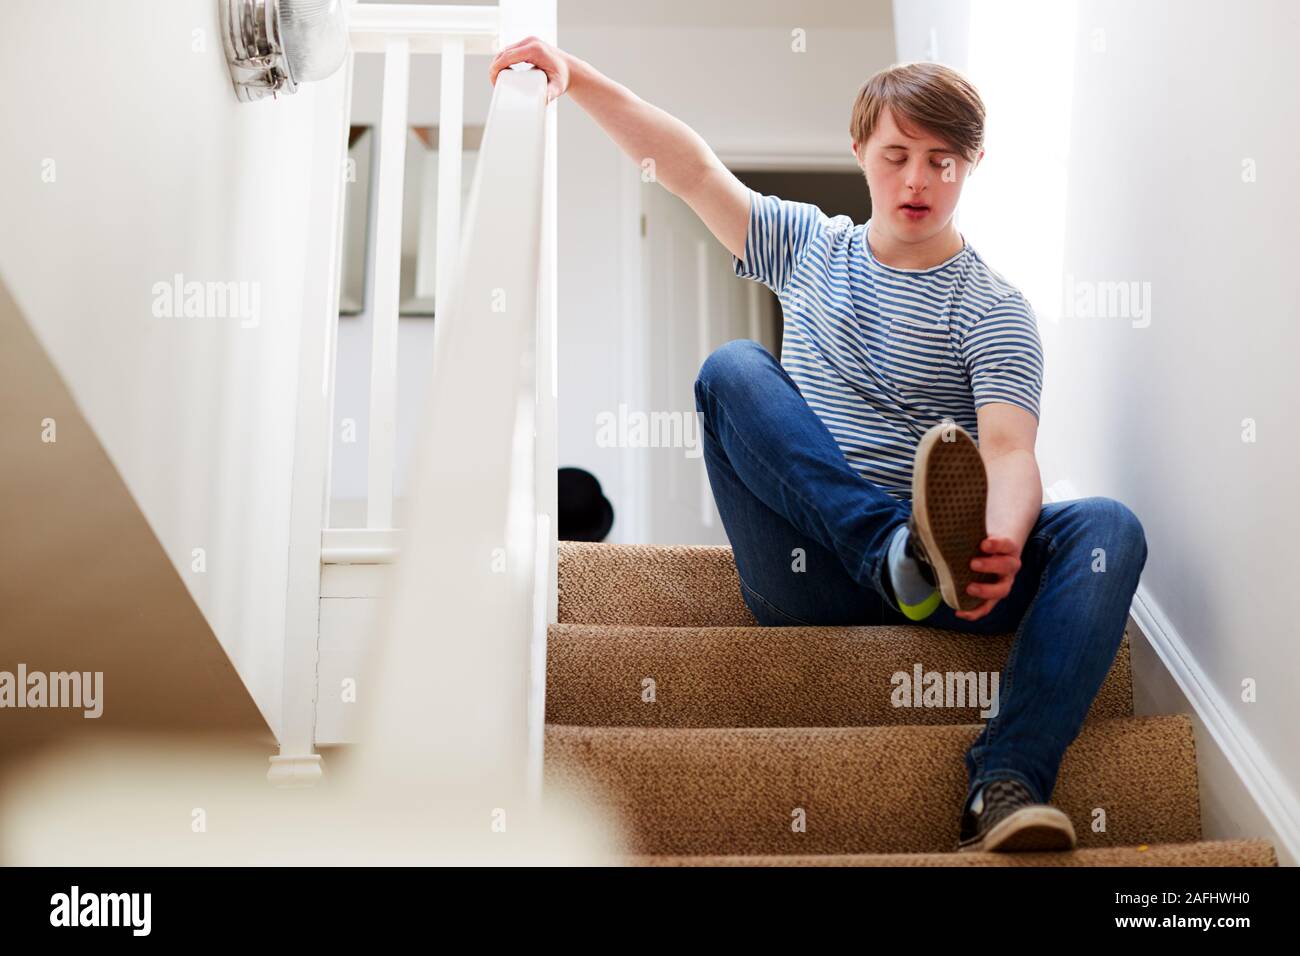 Young Downs Syndrome Man Sitting On Stairs Putting On Shoes At Home Stock Photo